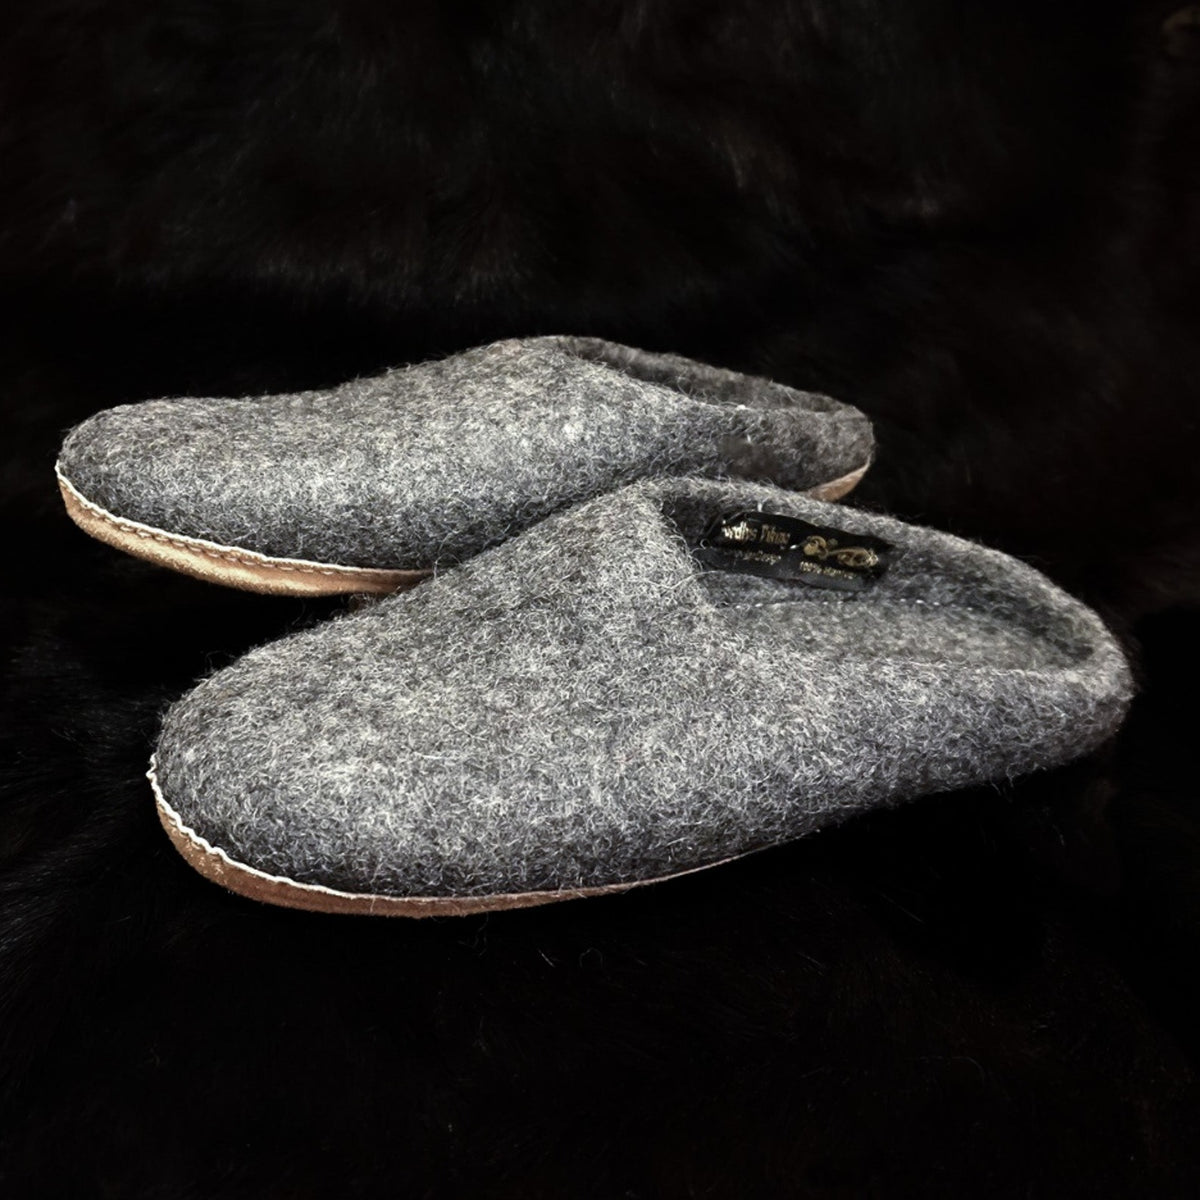 Slip-in slipper with leather sole